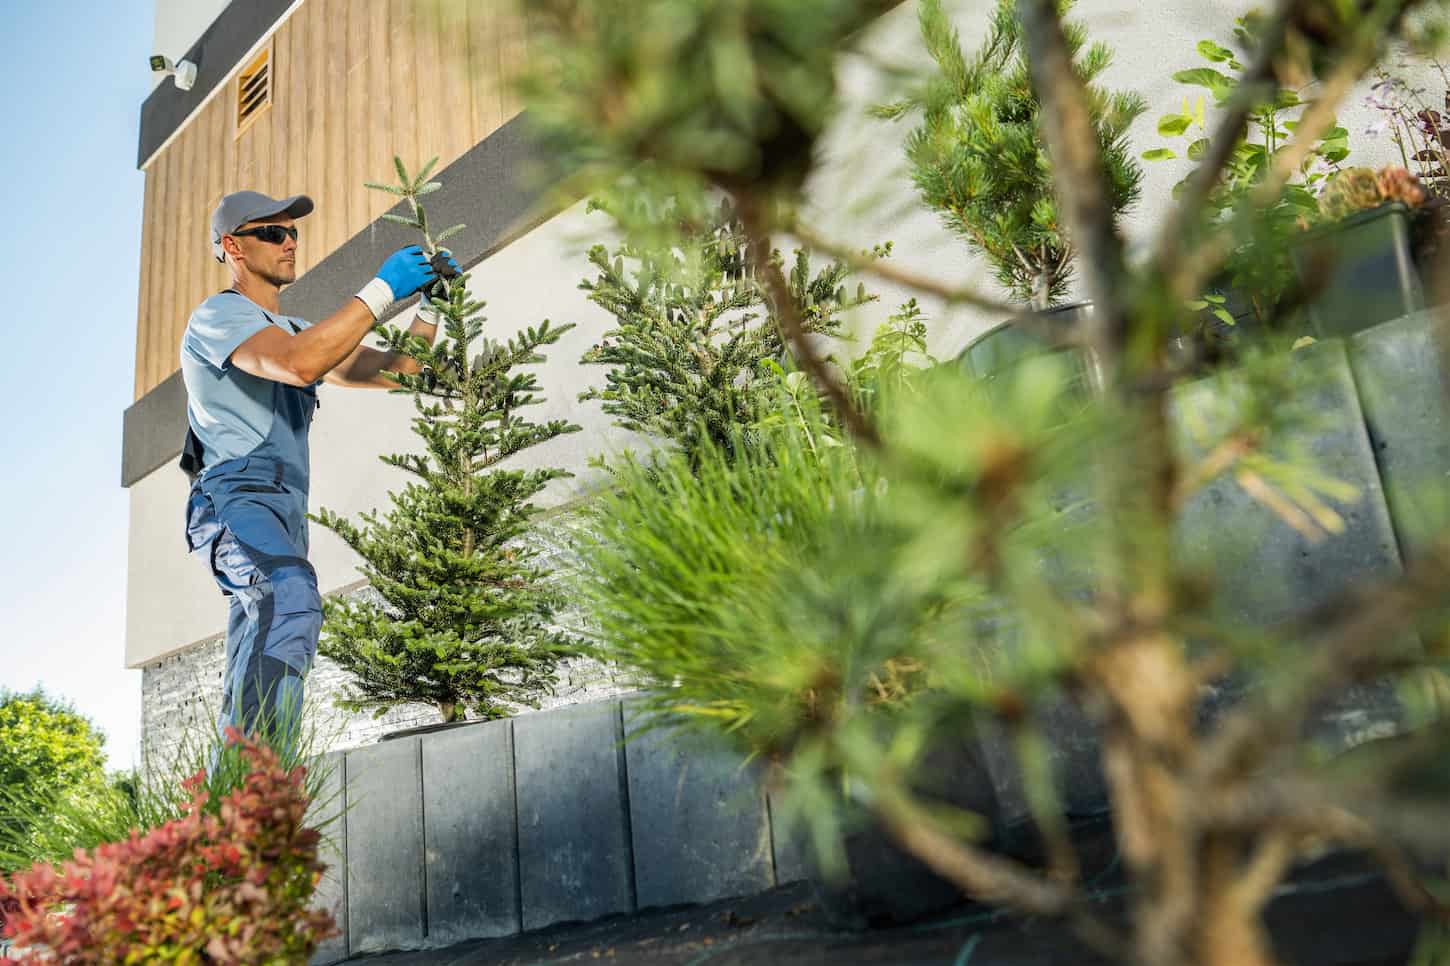 An image of a Professional Caucasian Landscaper and Gardener in His 40s Planting Large Spruce Trees in a Residential Garden.